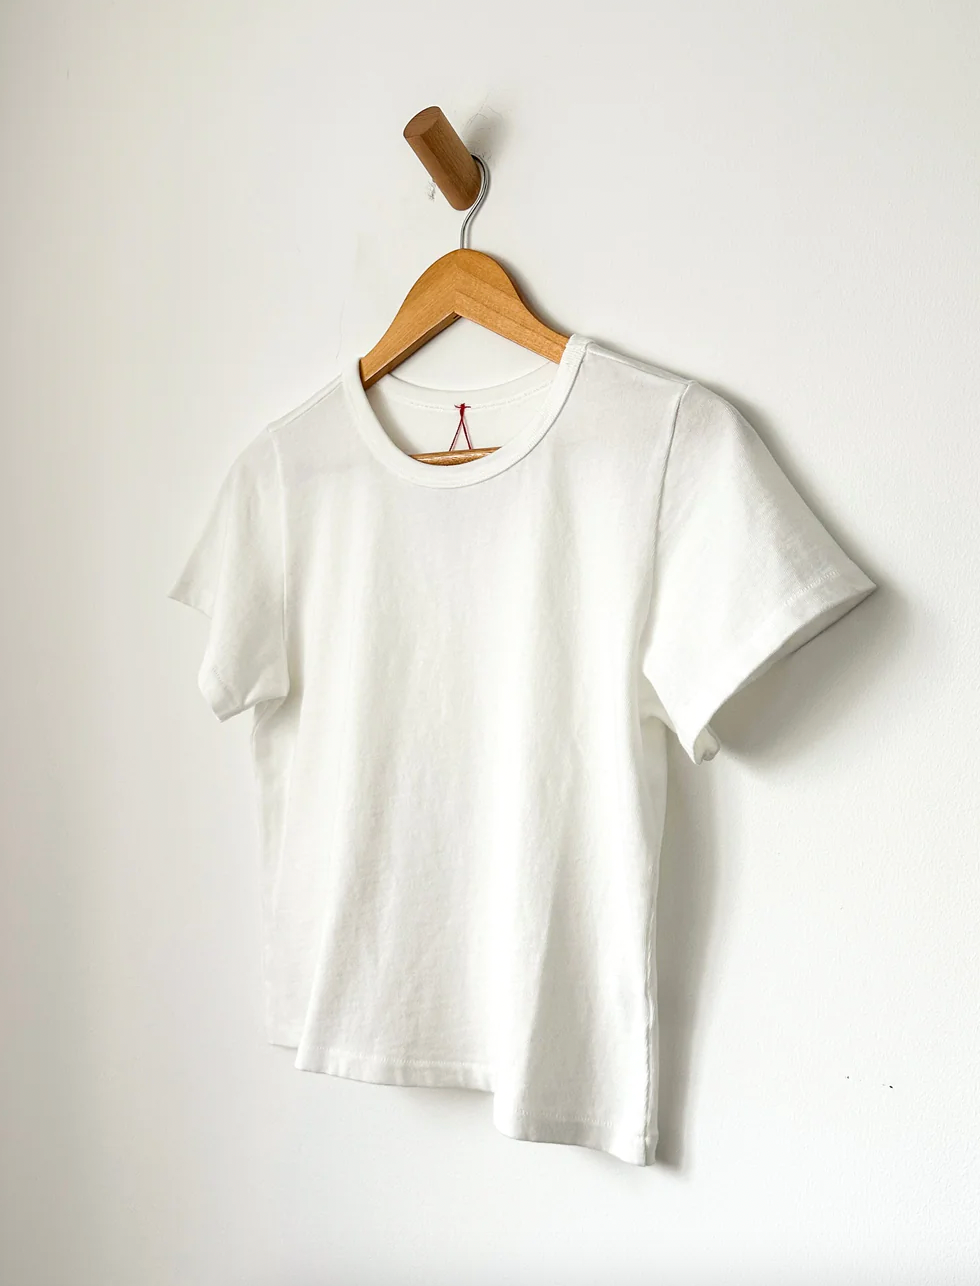 Product Image for The Little Boy Tee, Vintage White